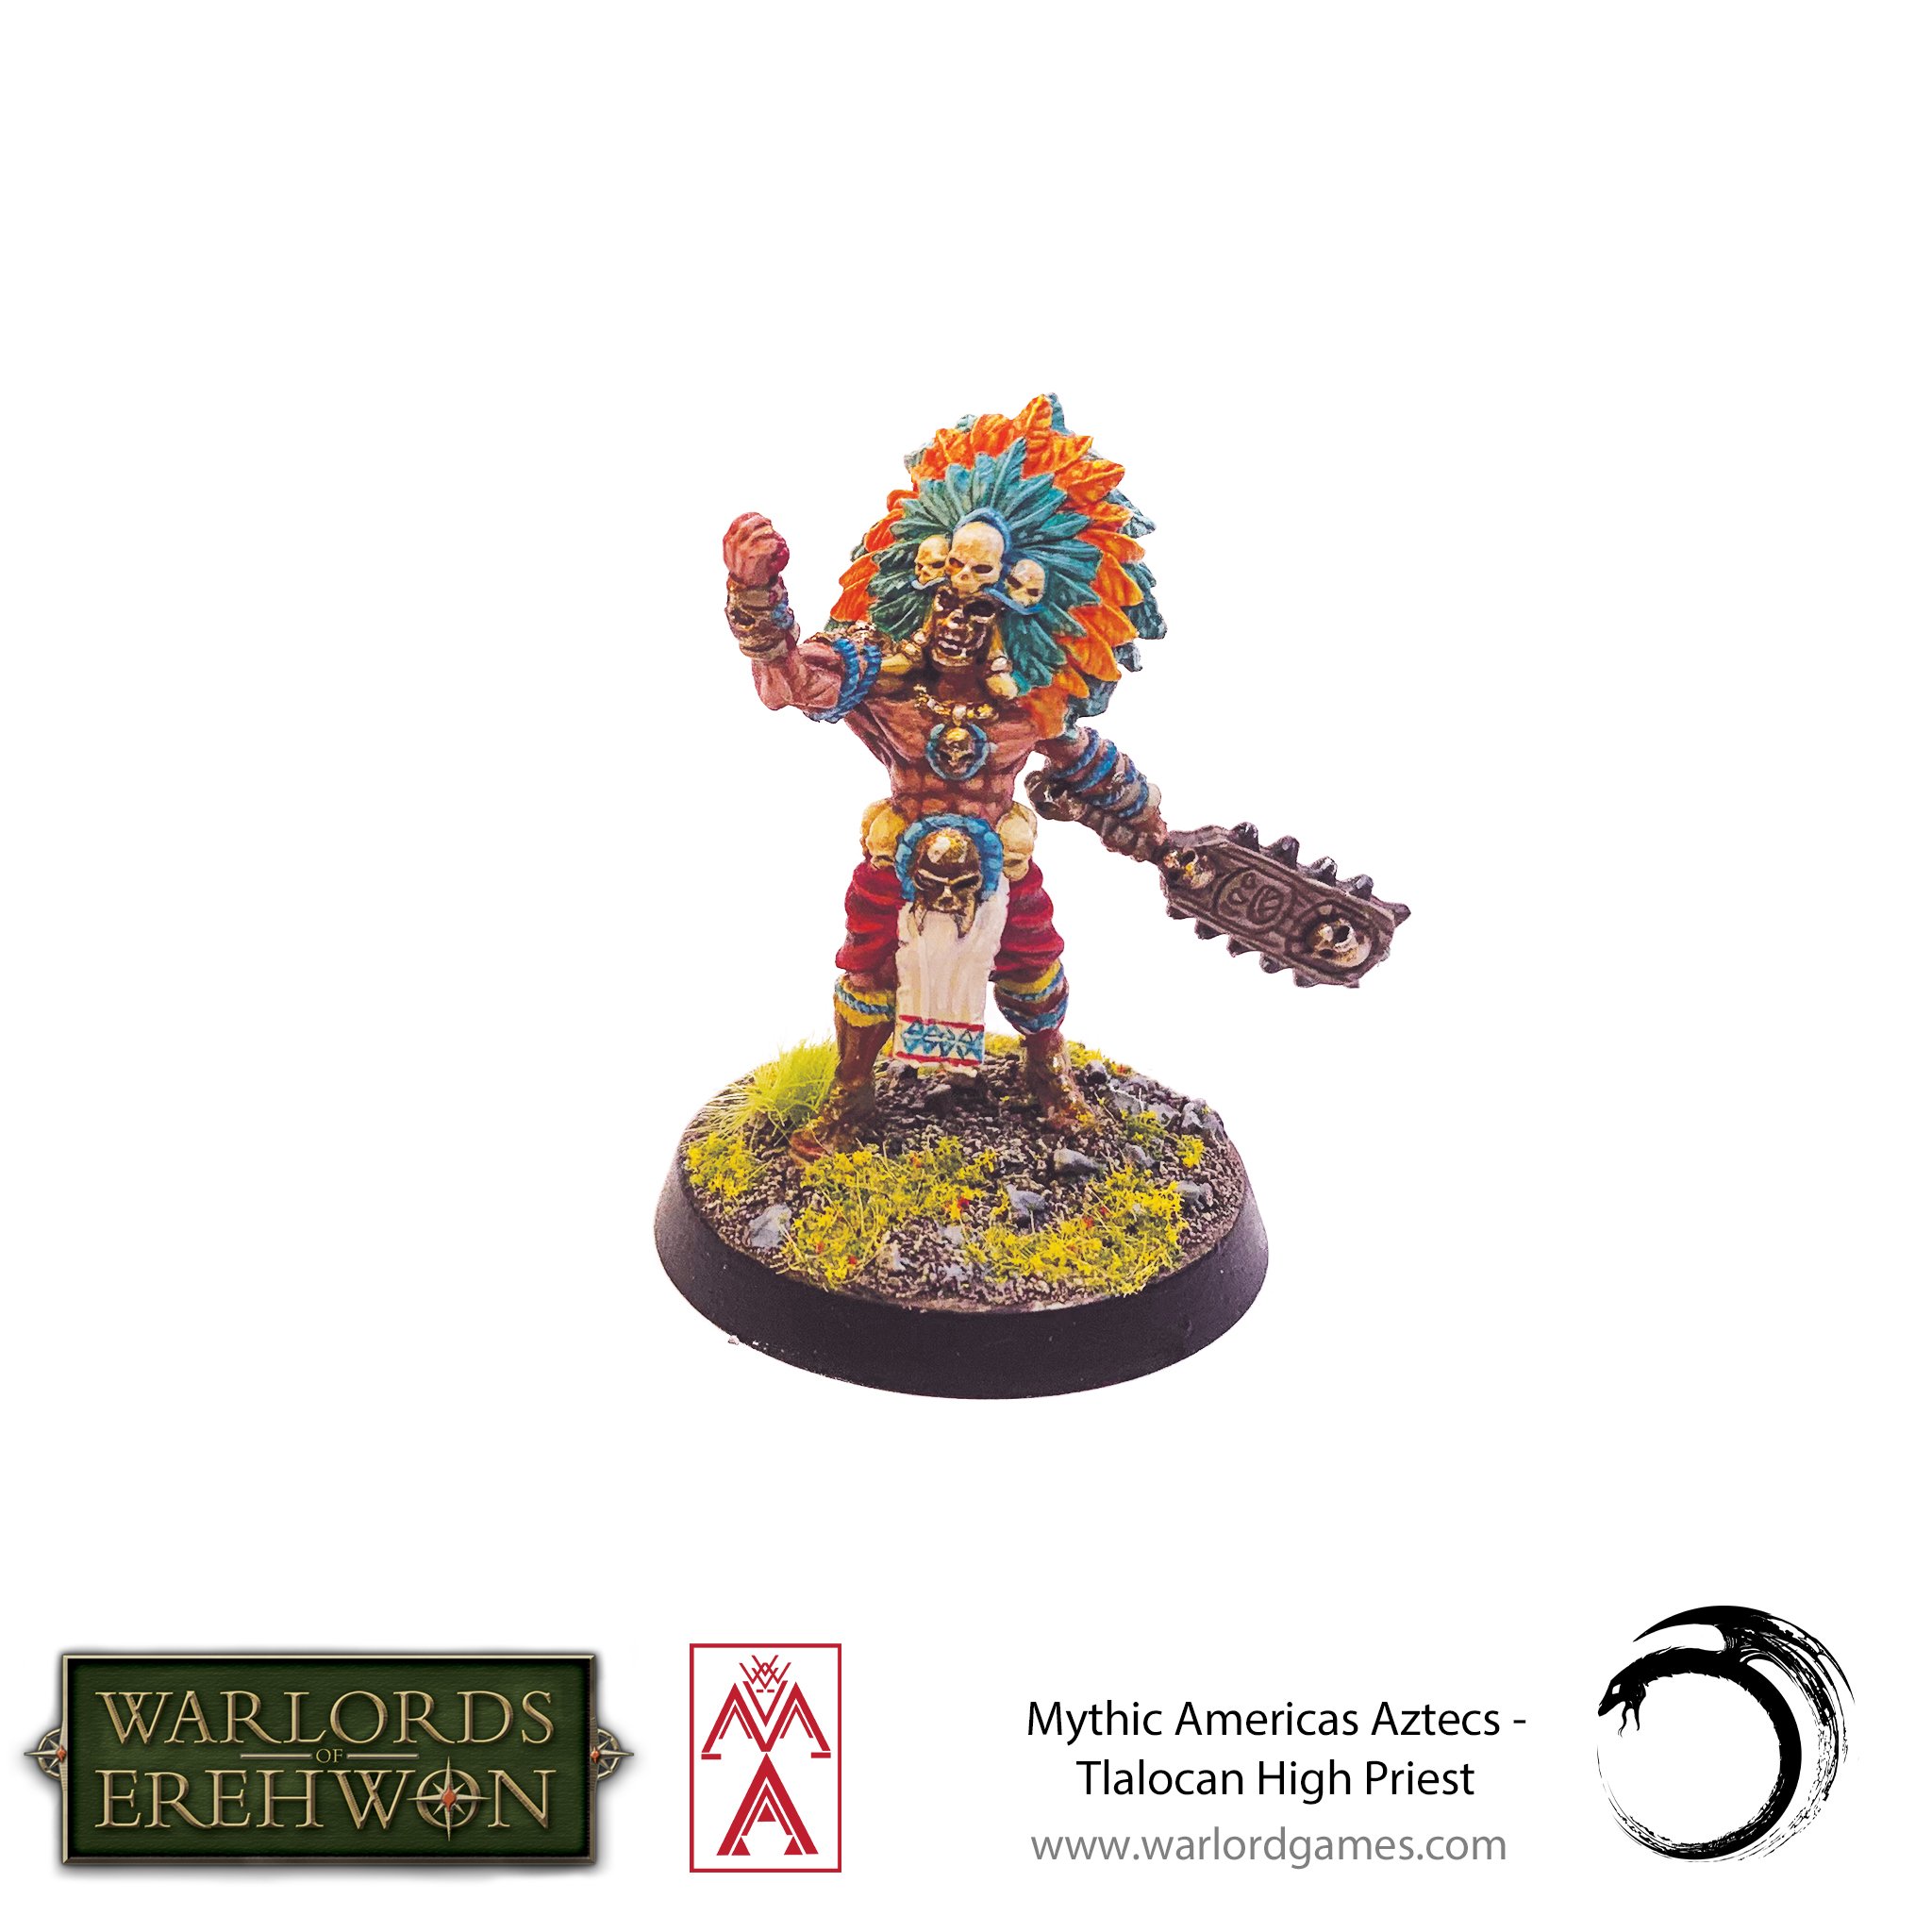 Warlords of Erehwon: Mythic Americas- Aztecs: Tlalocan High Priest 